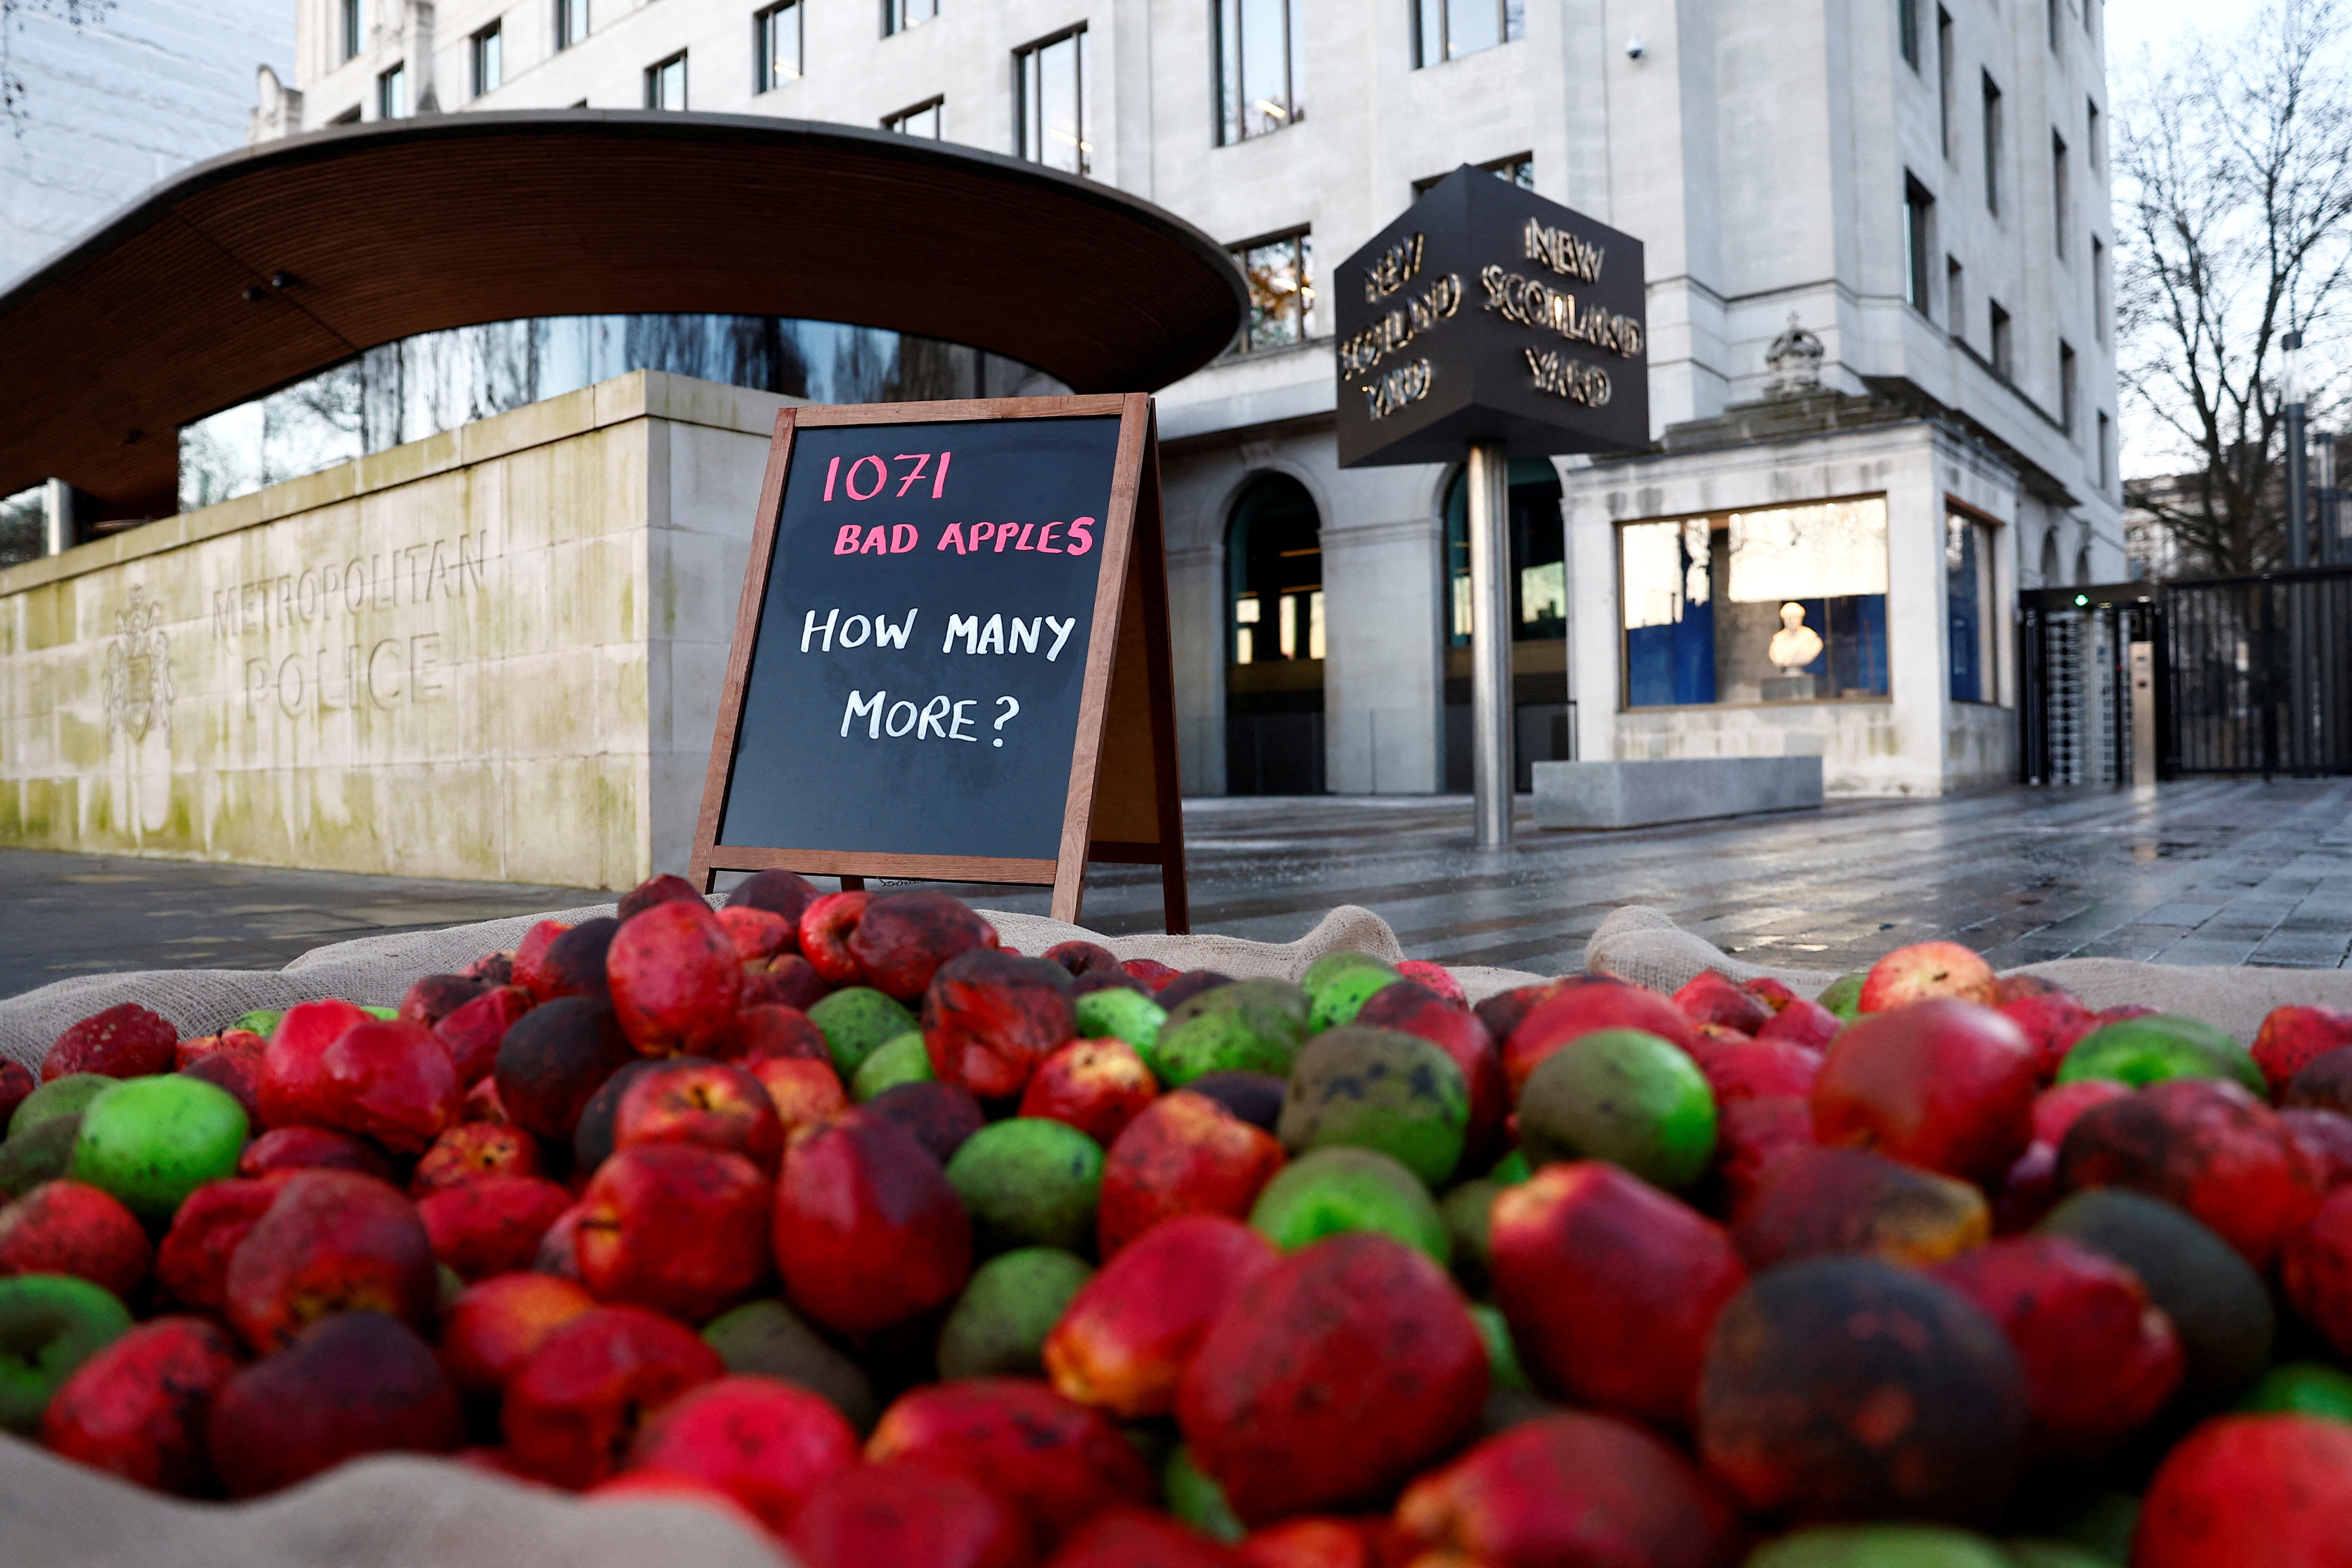 ‘Rotten apples’ left outside New Scotland Yard as part of a protest by the Refuge charity